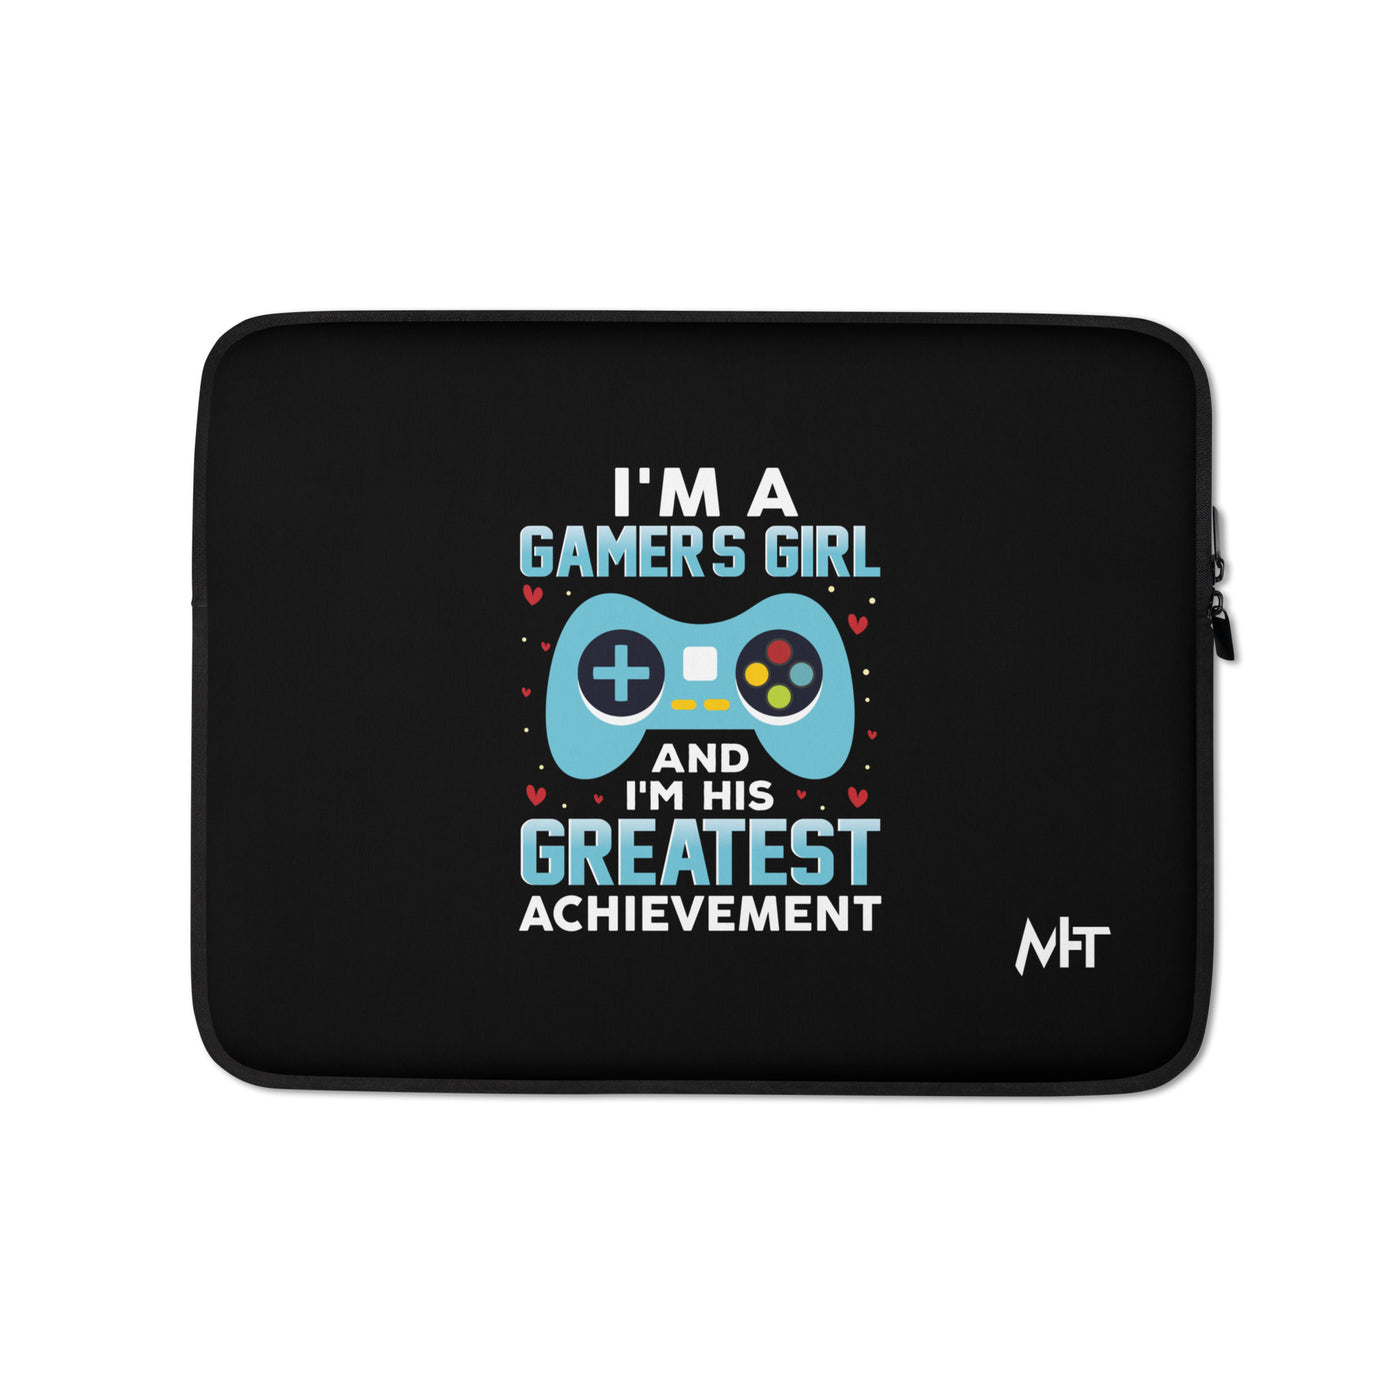 I am a Gamer's Girl, I am his Greatest Achievement (turquoise text ) - Laptop Sleeve